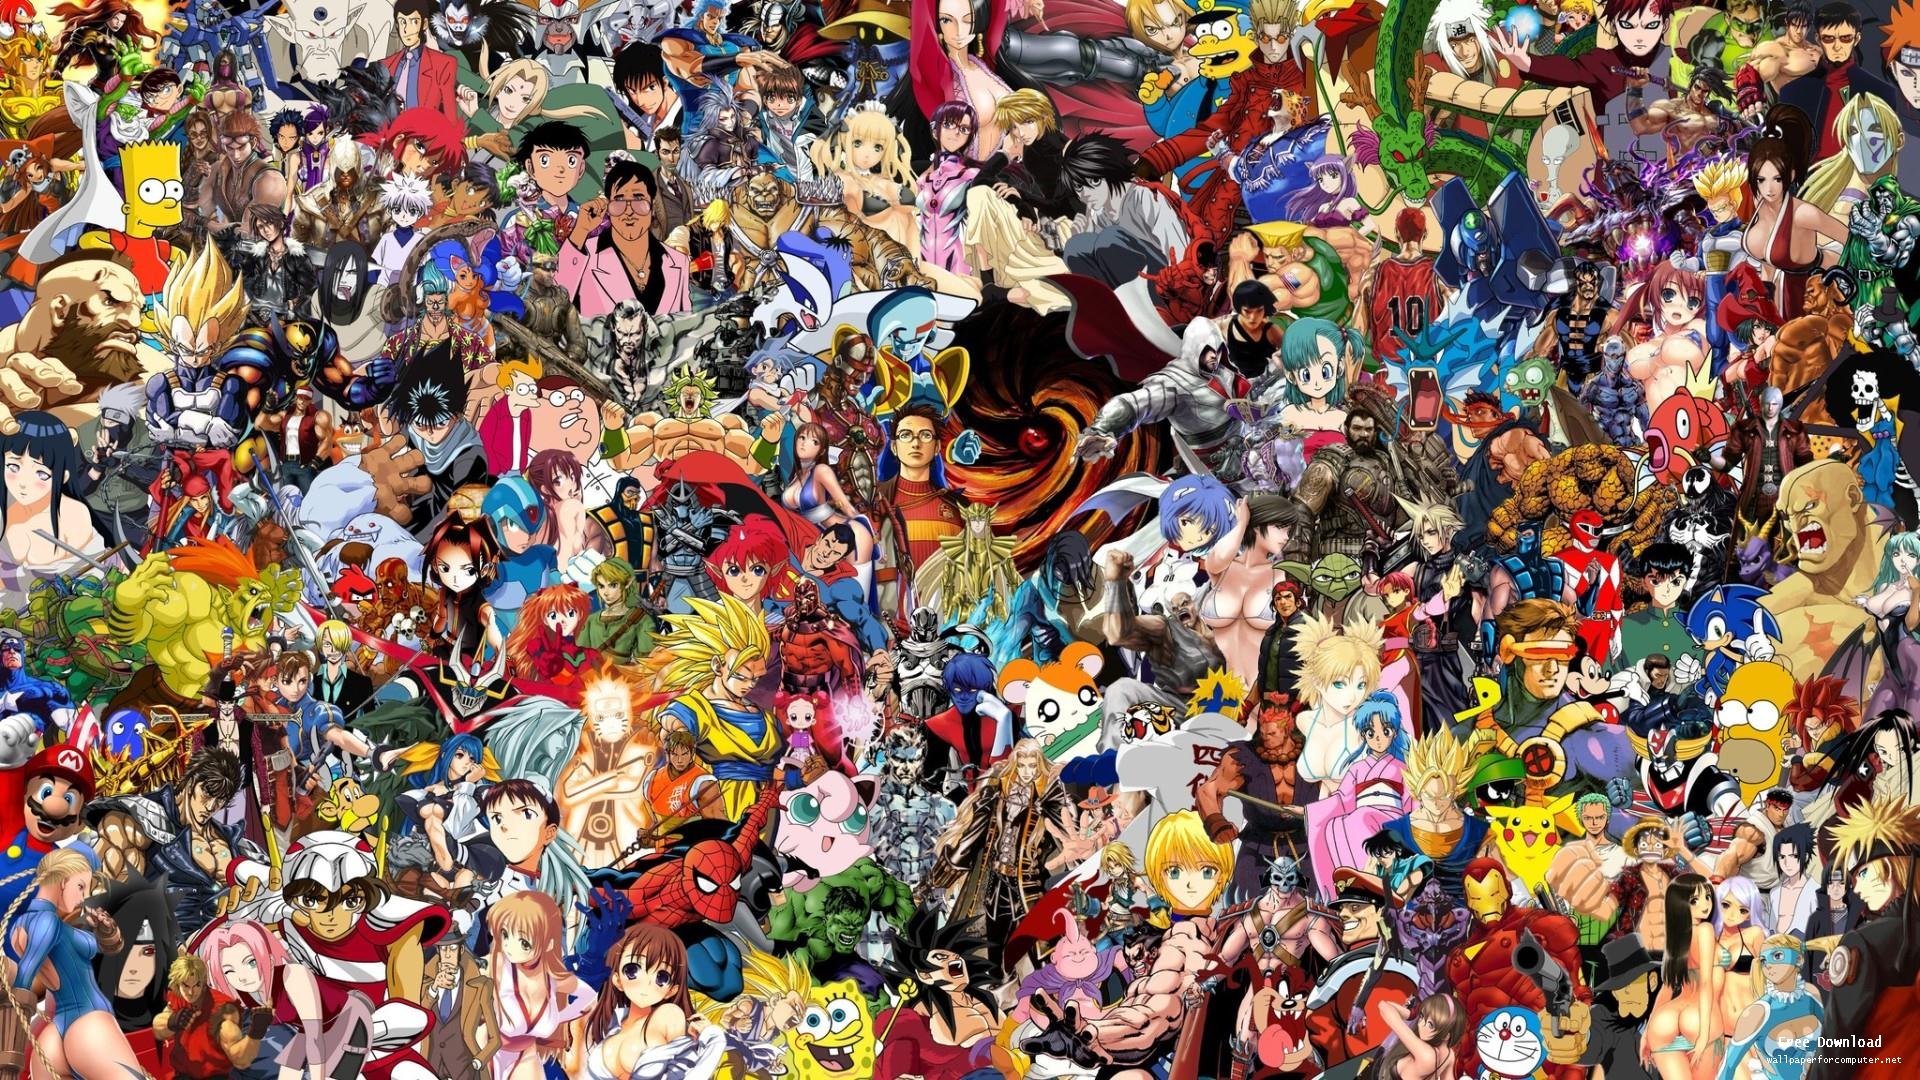 wallpaper games,people,crowd,art,animated cartoon,collage